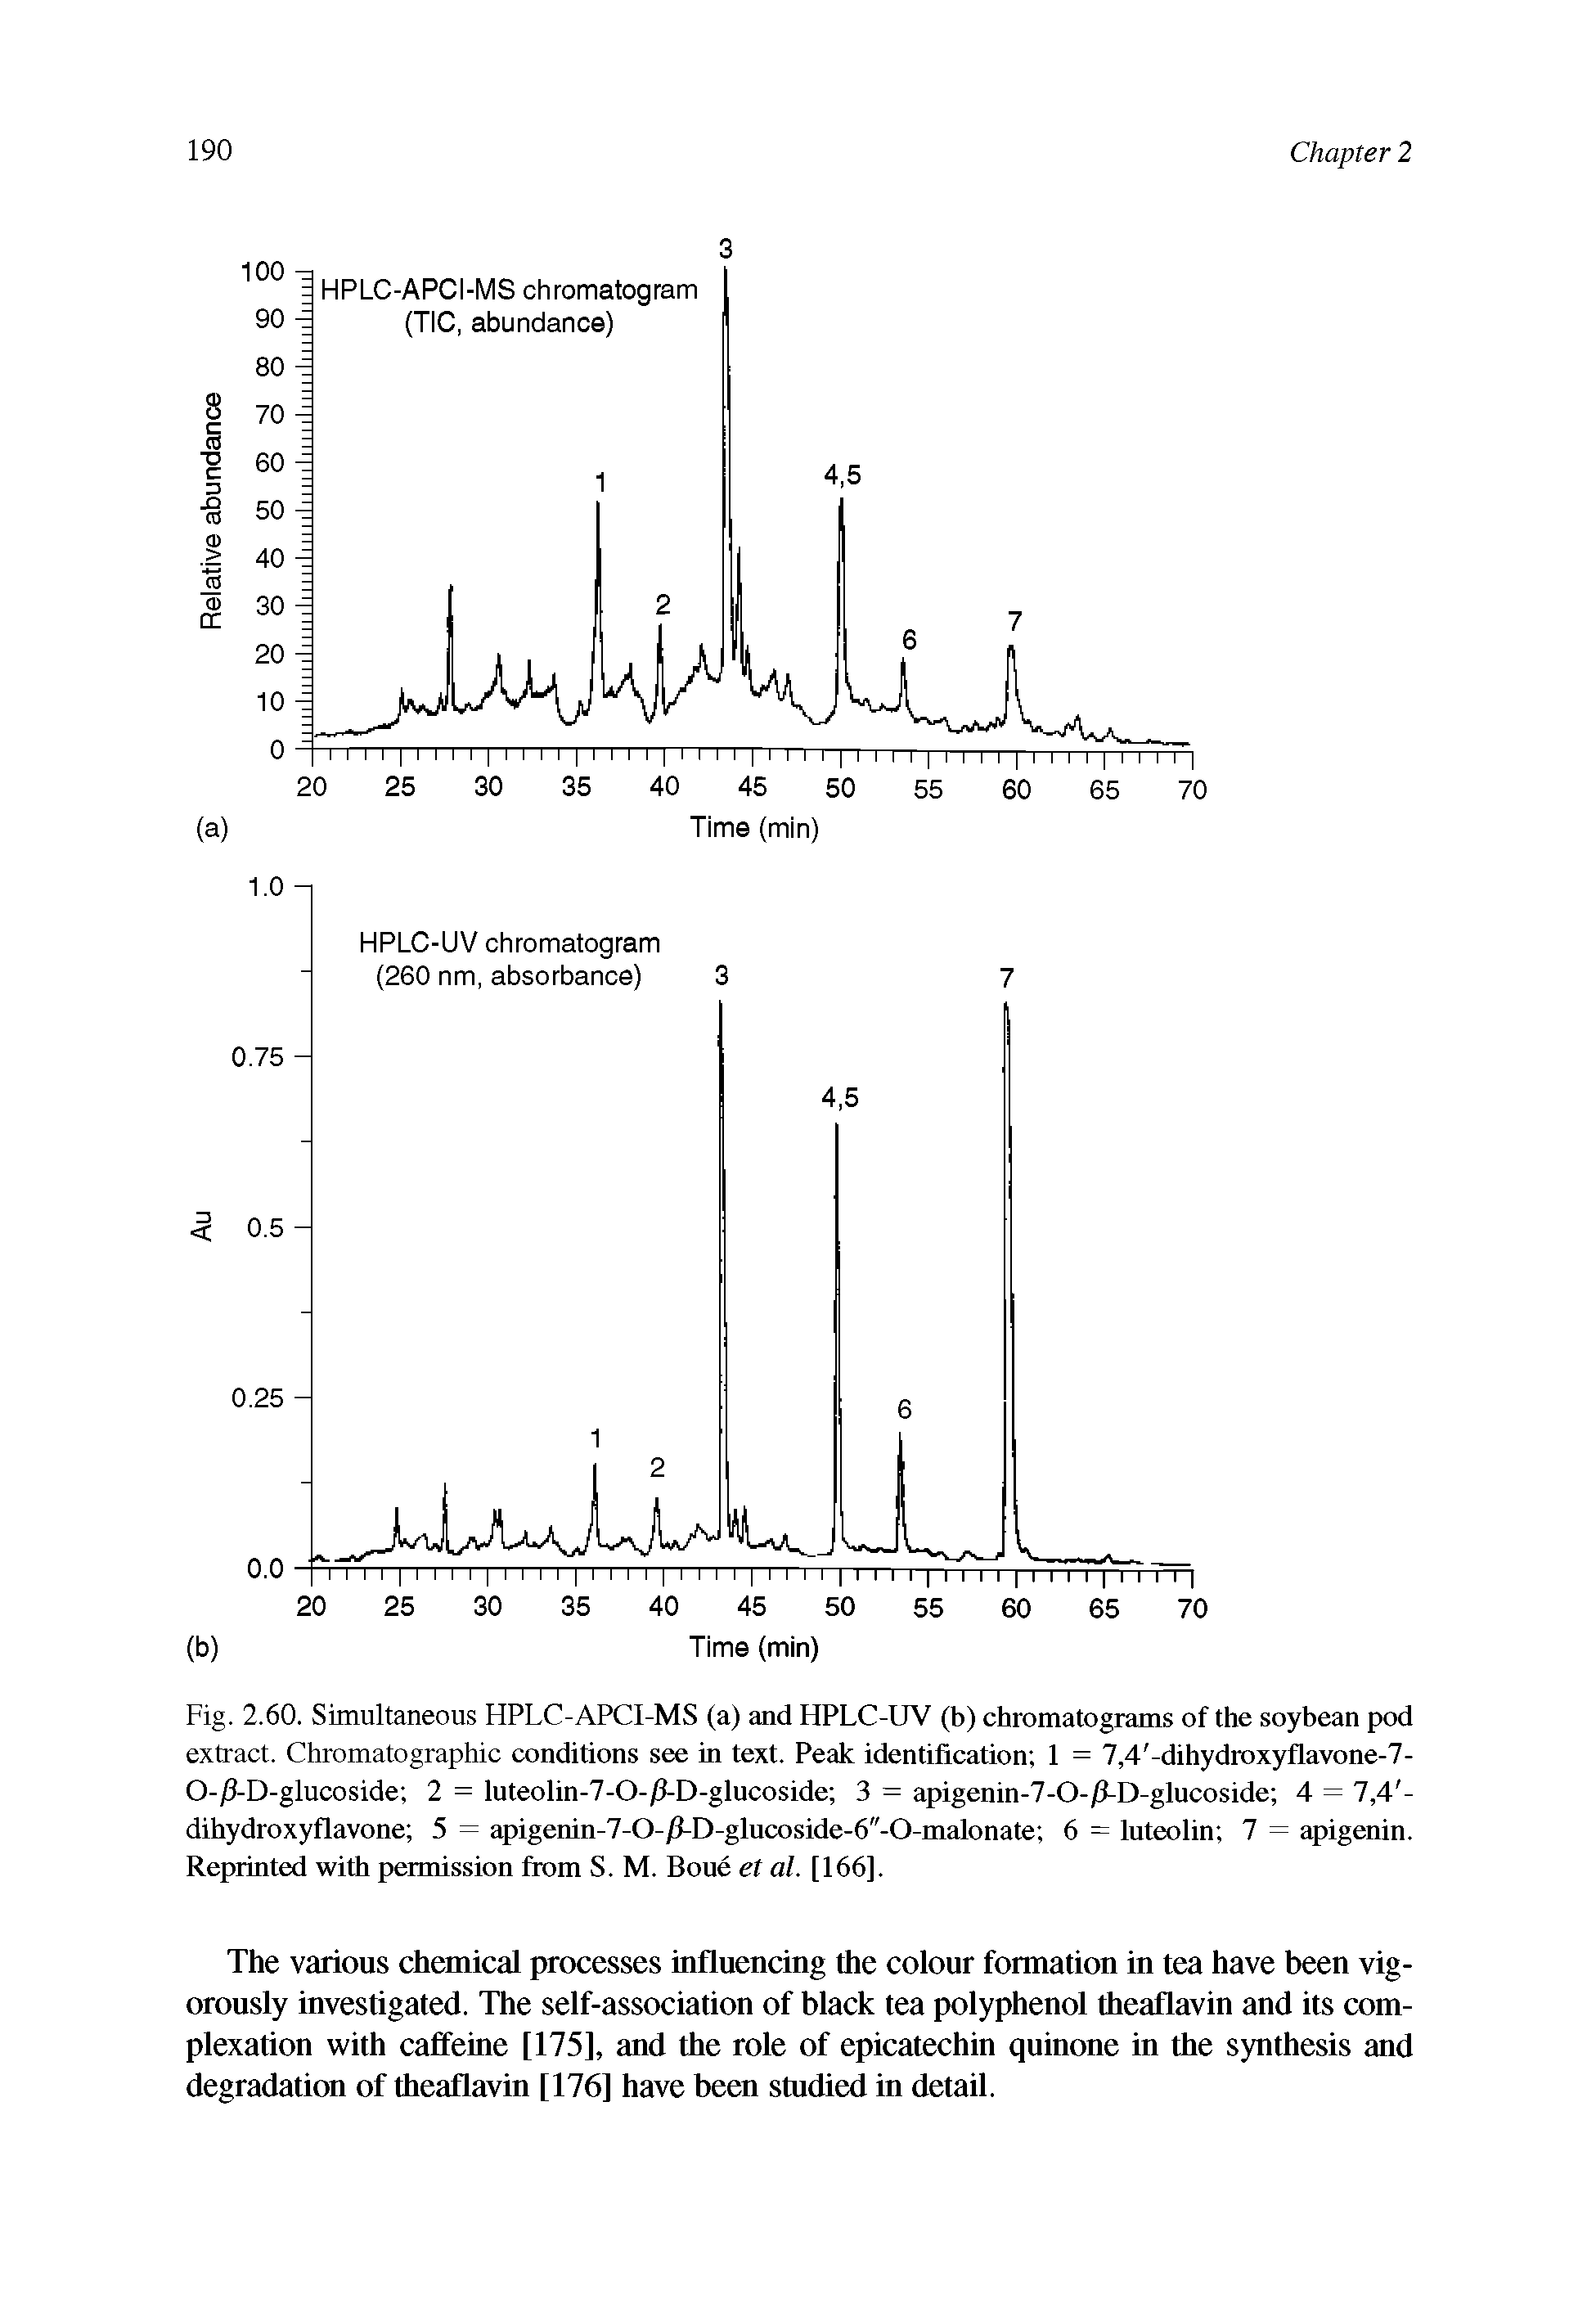 Fig. 2.60. Simultaneous HPLC-APCI-MS (a) and HPLC-UV (b) chromatograms of the soybean pod extract. Chromatographic conditions see in text. Peak identification 1 = 7,4 -dihydroxyflavone-7-0-/l-D-glucoside 2 = luteolin-7-0-/i-D-glucosidc 3 = apigcmn-7-0-/5-l)-glucoside 4 = 7,4 -dihydroxyflavone 5 = apigcnin-7-0-/]-D-ghicosidc-6"-0-malonate 6 = luteolin 7 = apigenin. Reprinted with permission from S. M. Boue el al. [166].